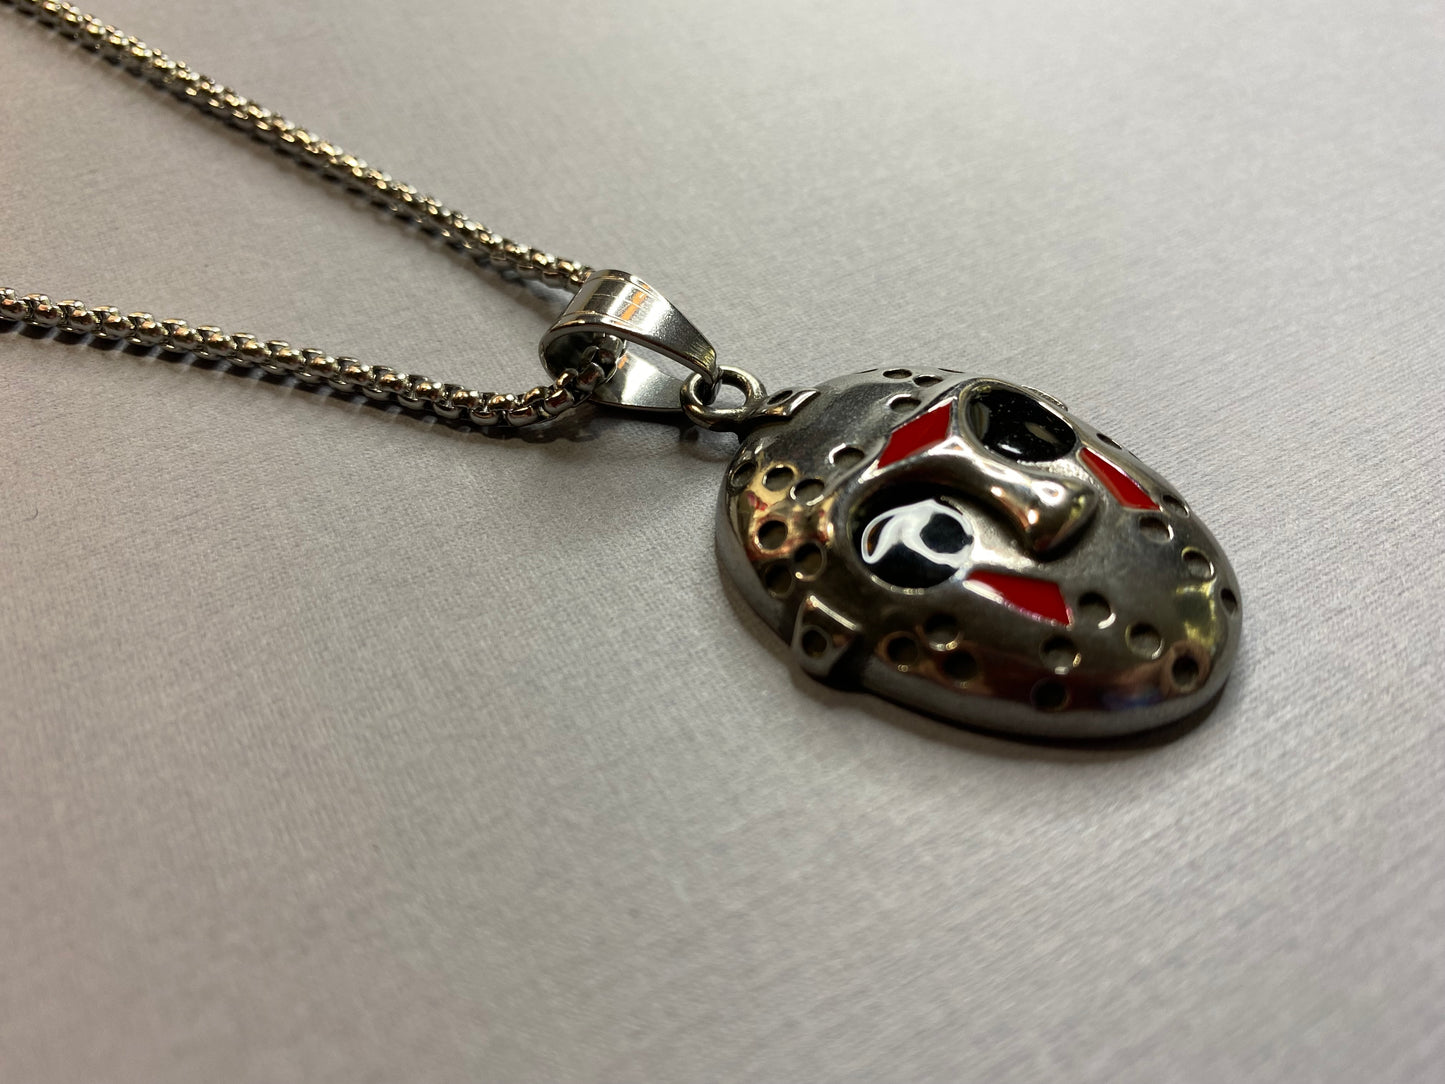 JASON FRIDAY THE 13th NECKLACE